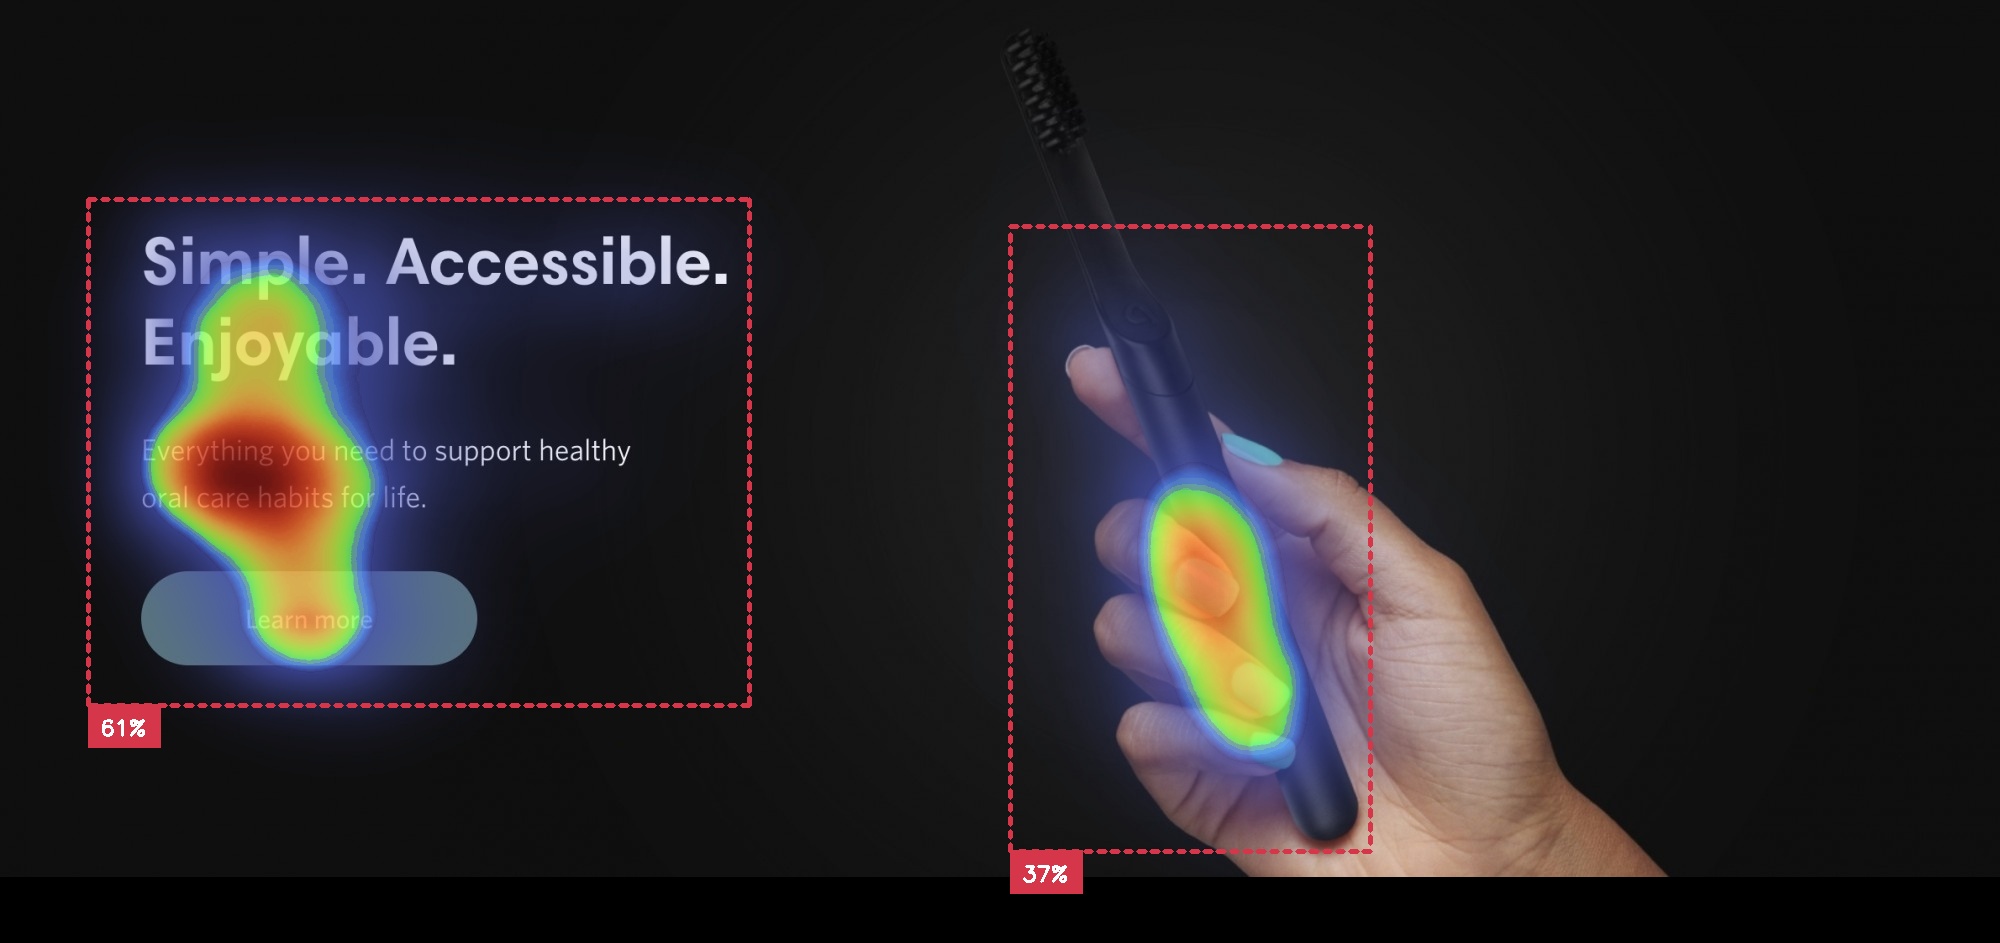 toothbrush in a hand with heading and button lots of black space with attention insight heatmap